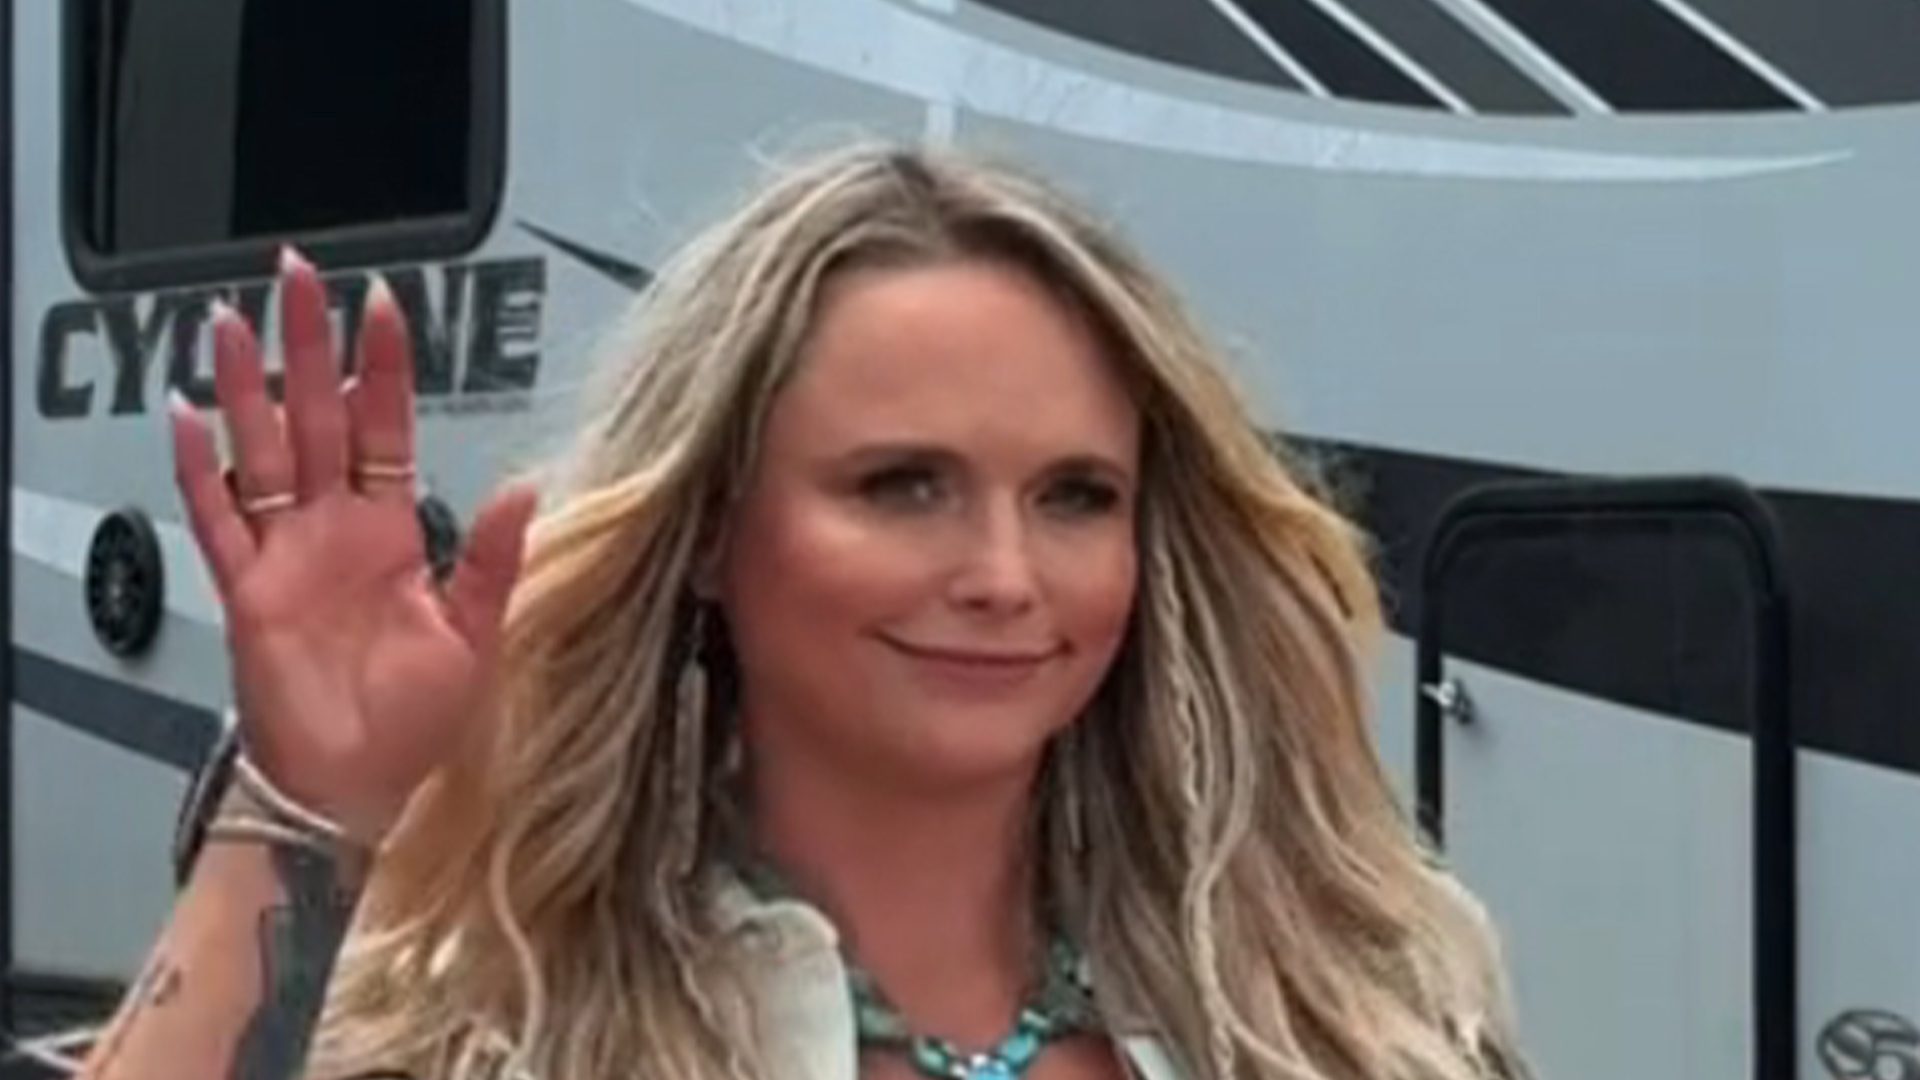 Miranda Lambert ‘walks into big week’ in low-cut dress as fans say star has ‘evolved’ after her husband grinded on women [Video]